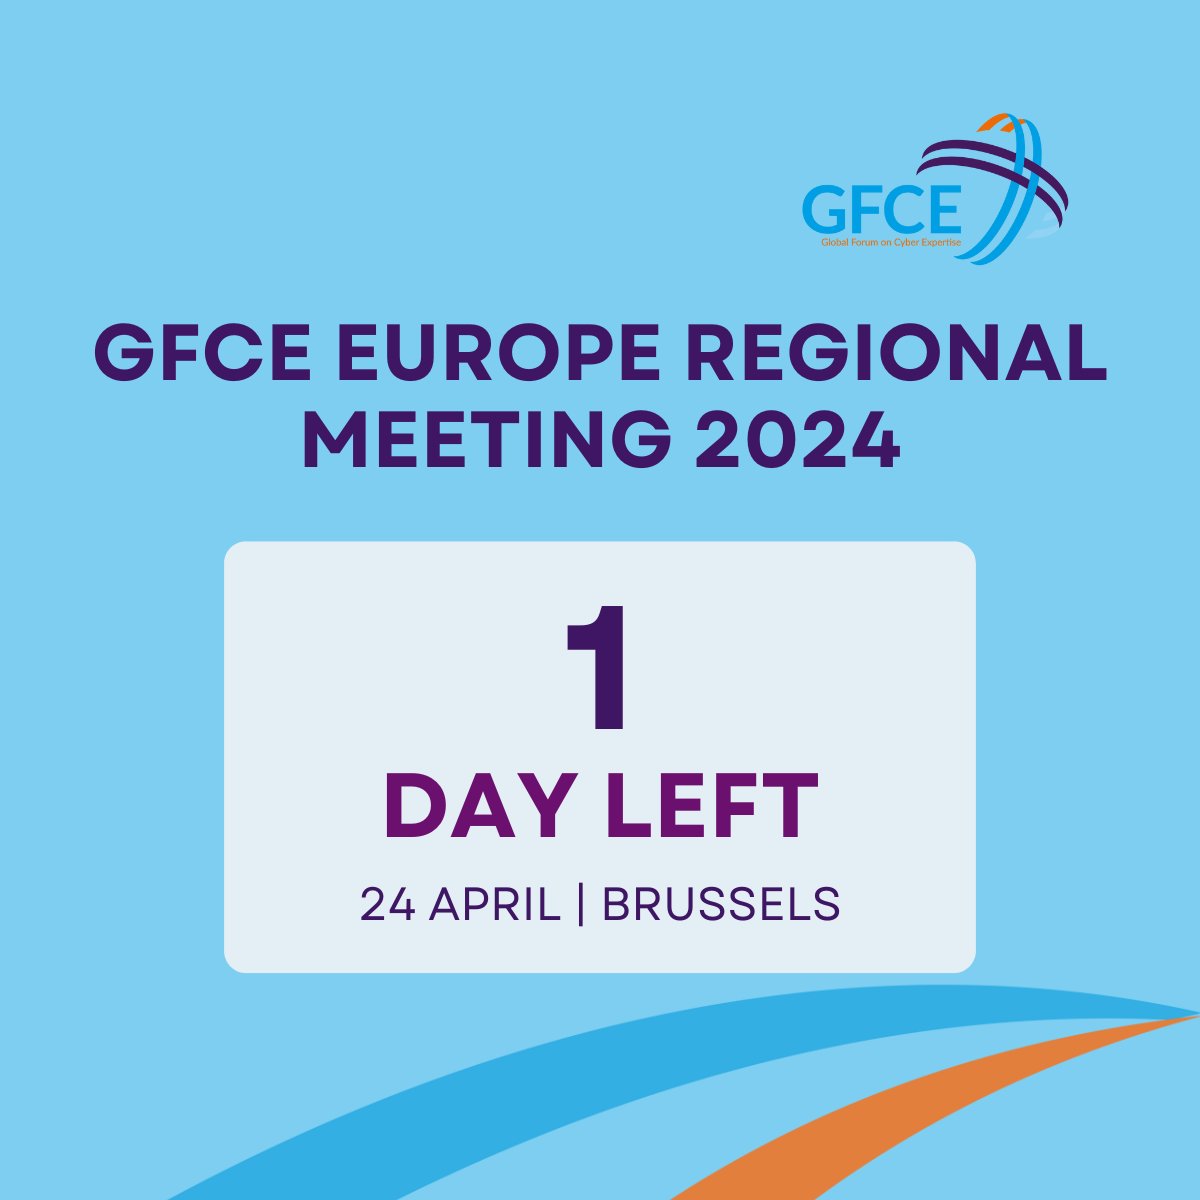 🚨 The #GFCE Europe Regional Meeting 2024 will take place tomorrow! Join regional experts for vital discussions on the future of cyber capacity building in Europe at the GFCE Regional Meeting in Brussels, starting at 2:00 PM tomorrow. Check the latest program, speakers, and key…